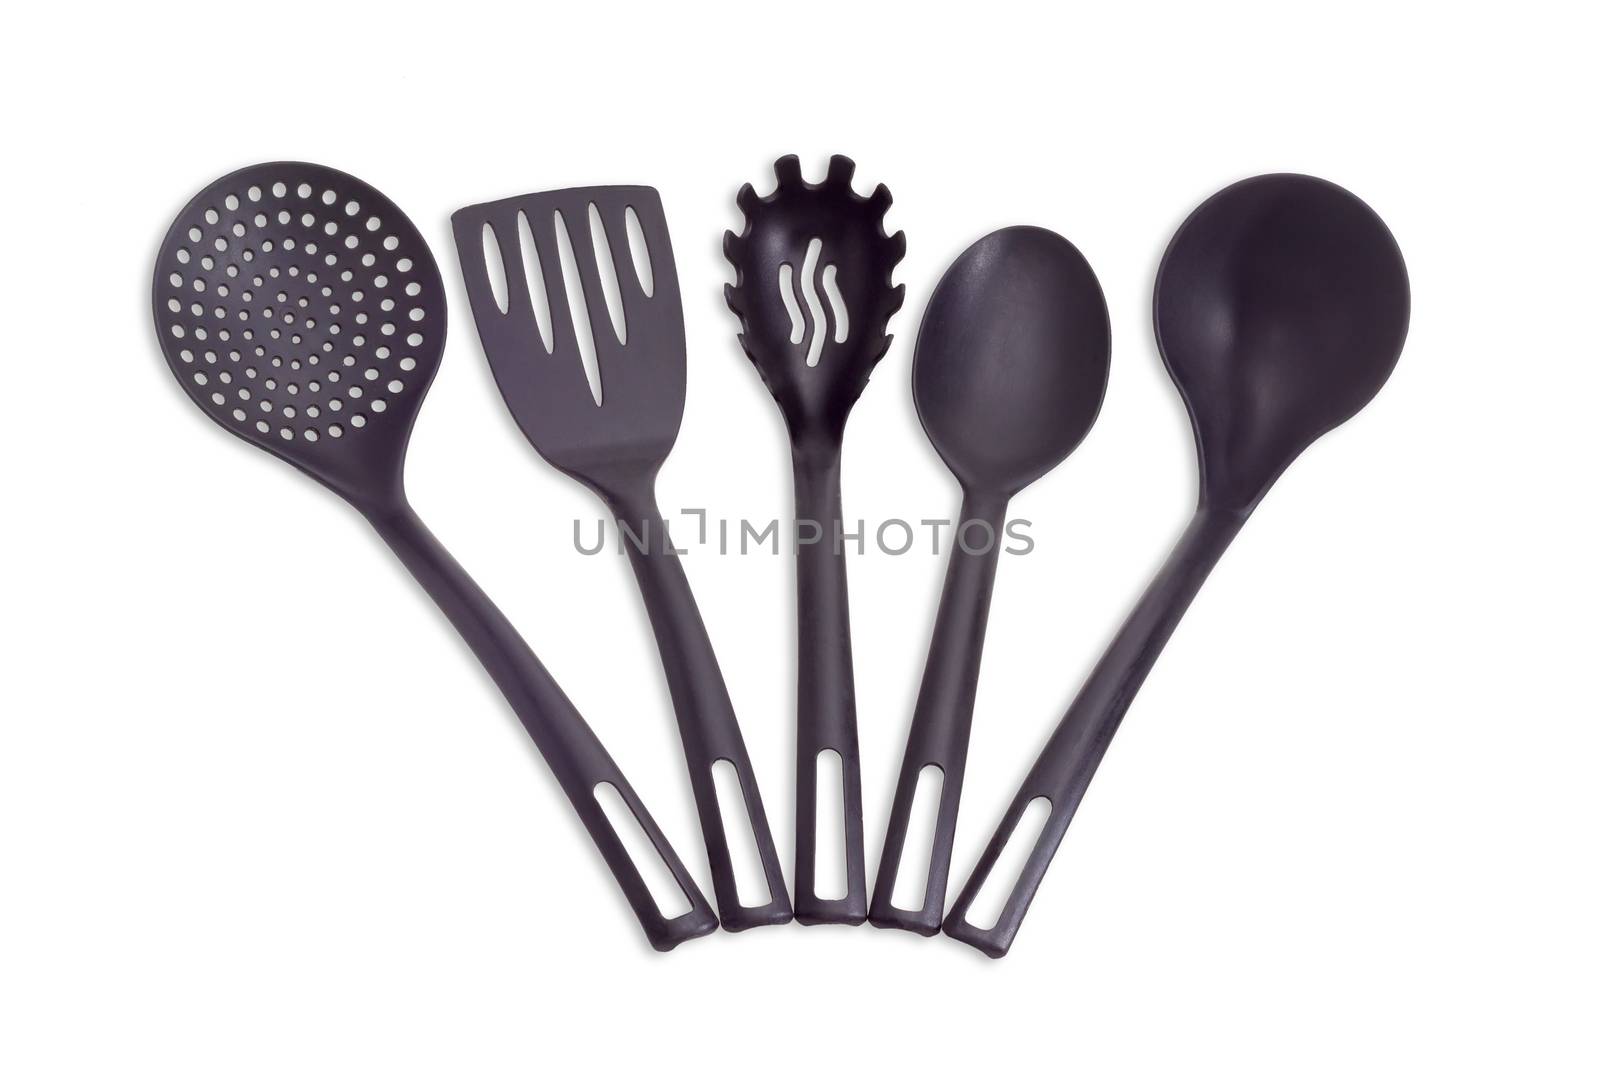 Set of plastic black cooking utensils consisting of skimmer, fish slice, slotted spoon, kitchen spoon and soup ladle on a light background
